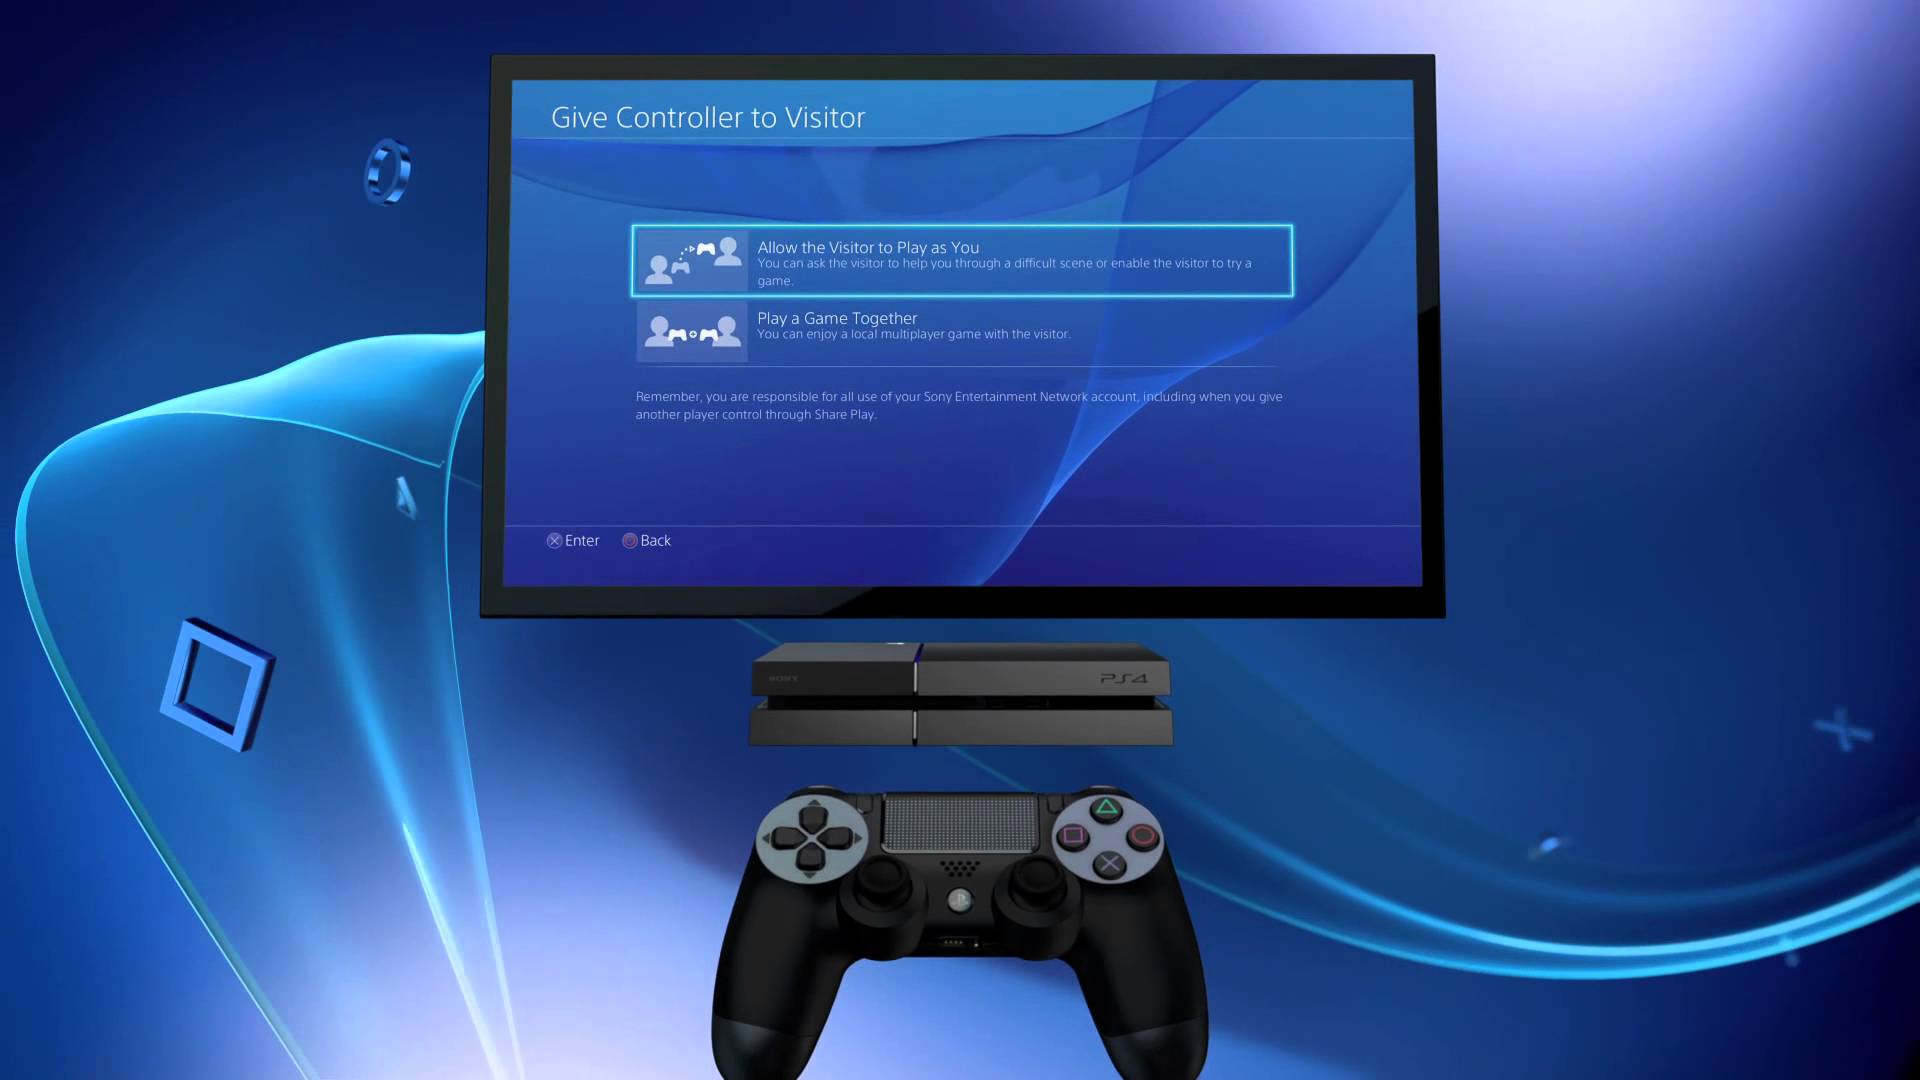 Steps to Set Up on PlayStation 4